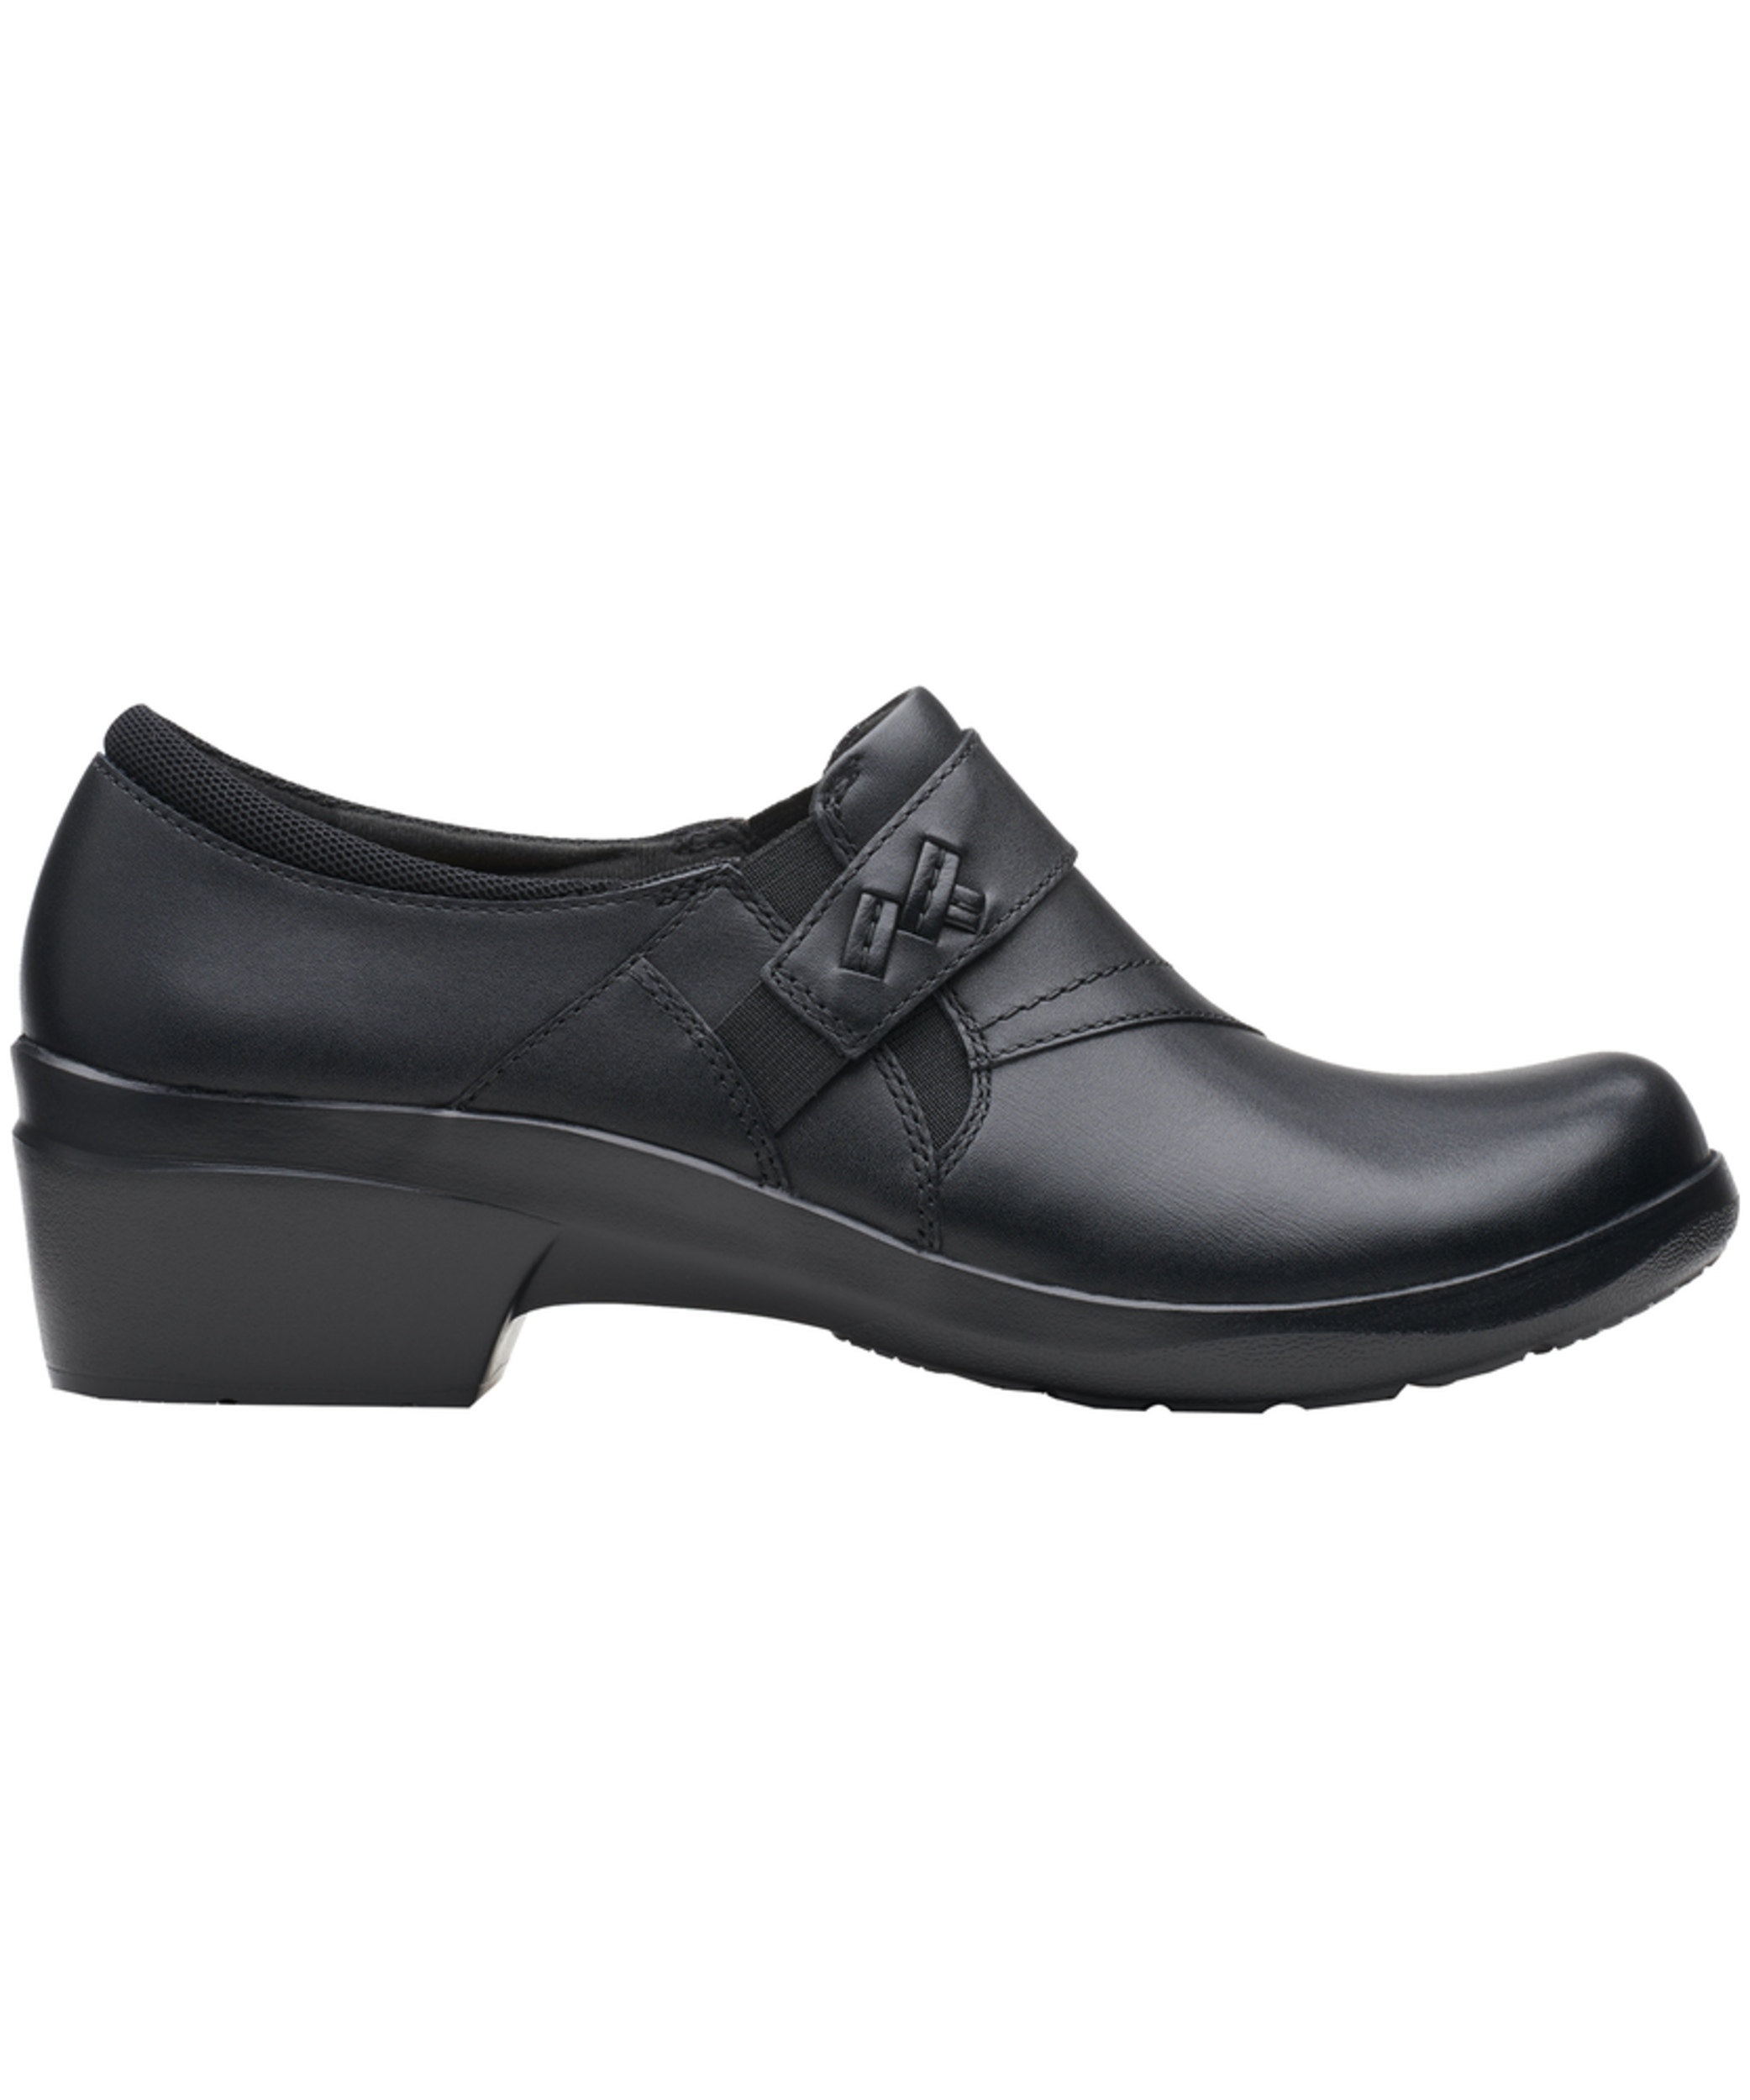 Clarks Women's Angie Pearl Leather Slip On Shoes - Black | Marks